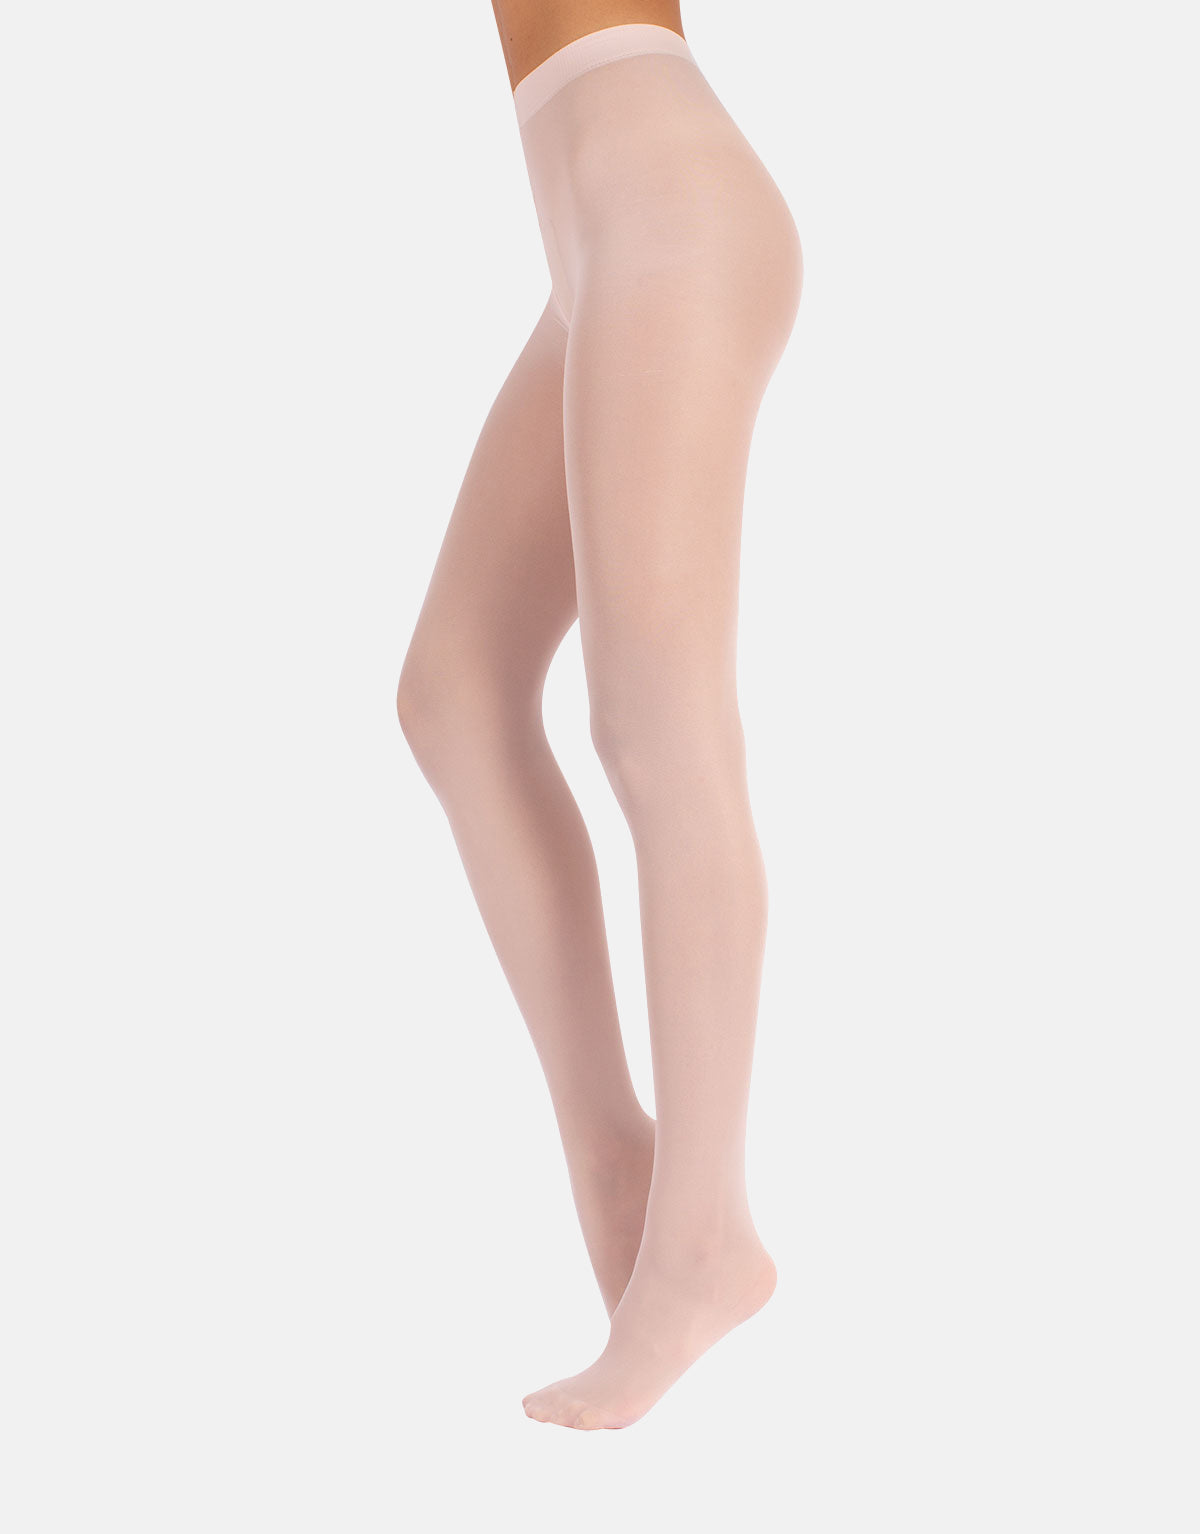 Calzitaly Dance Tights 40 Den - Plain opaque ballet pink tights with flat seams and cotton gusset.